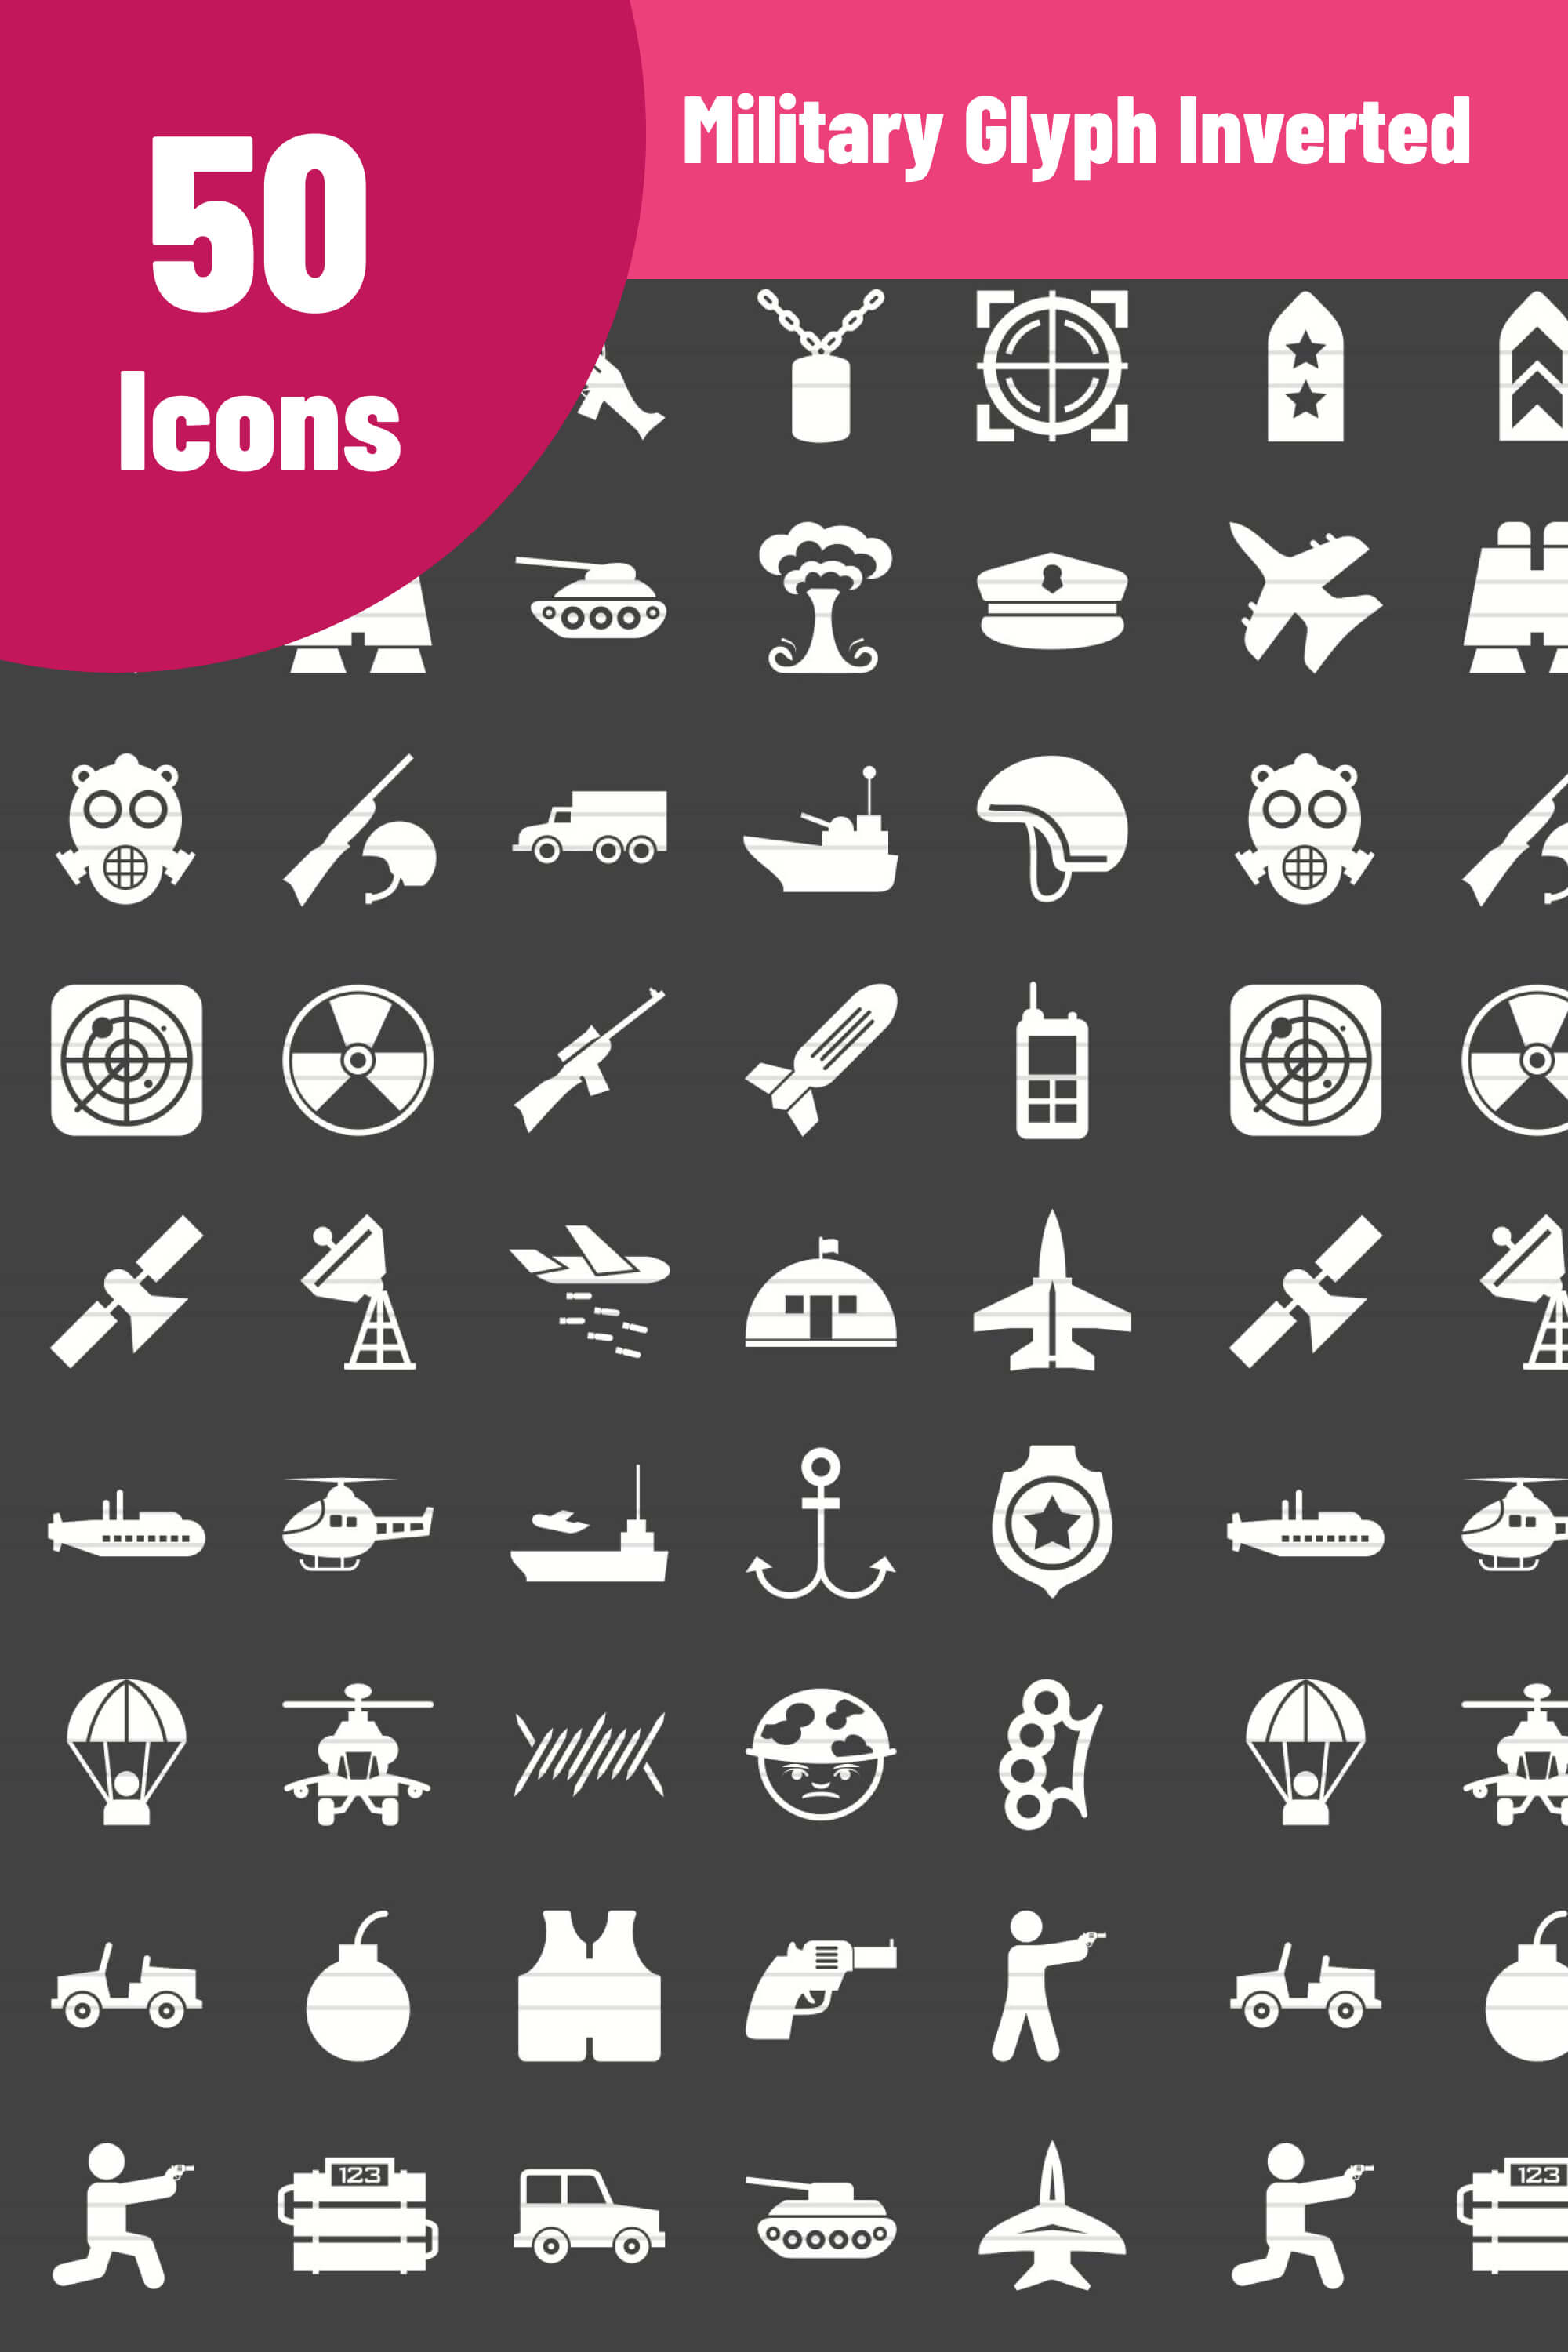 50 icons of ships, aircraft, weapons and more.